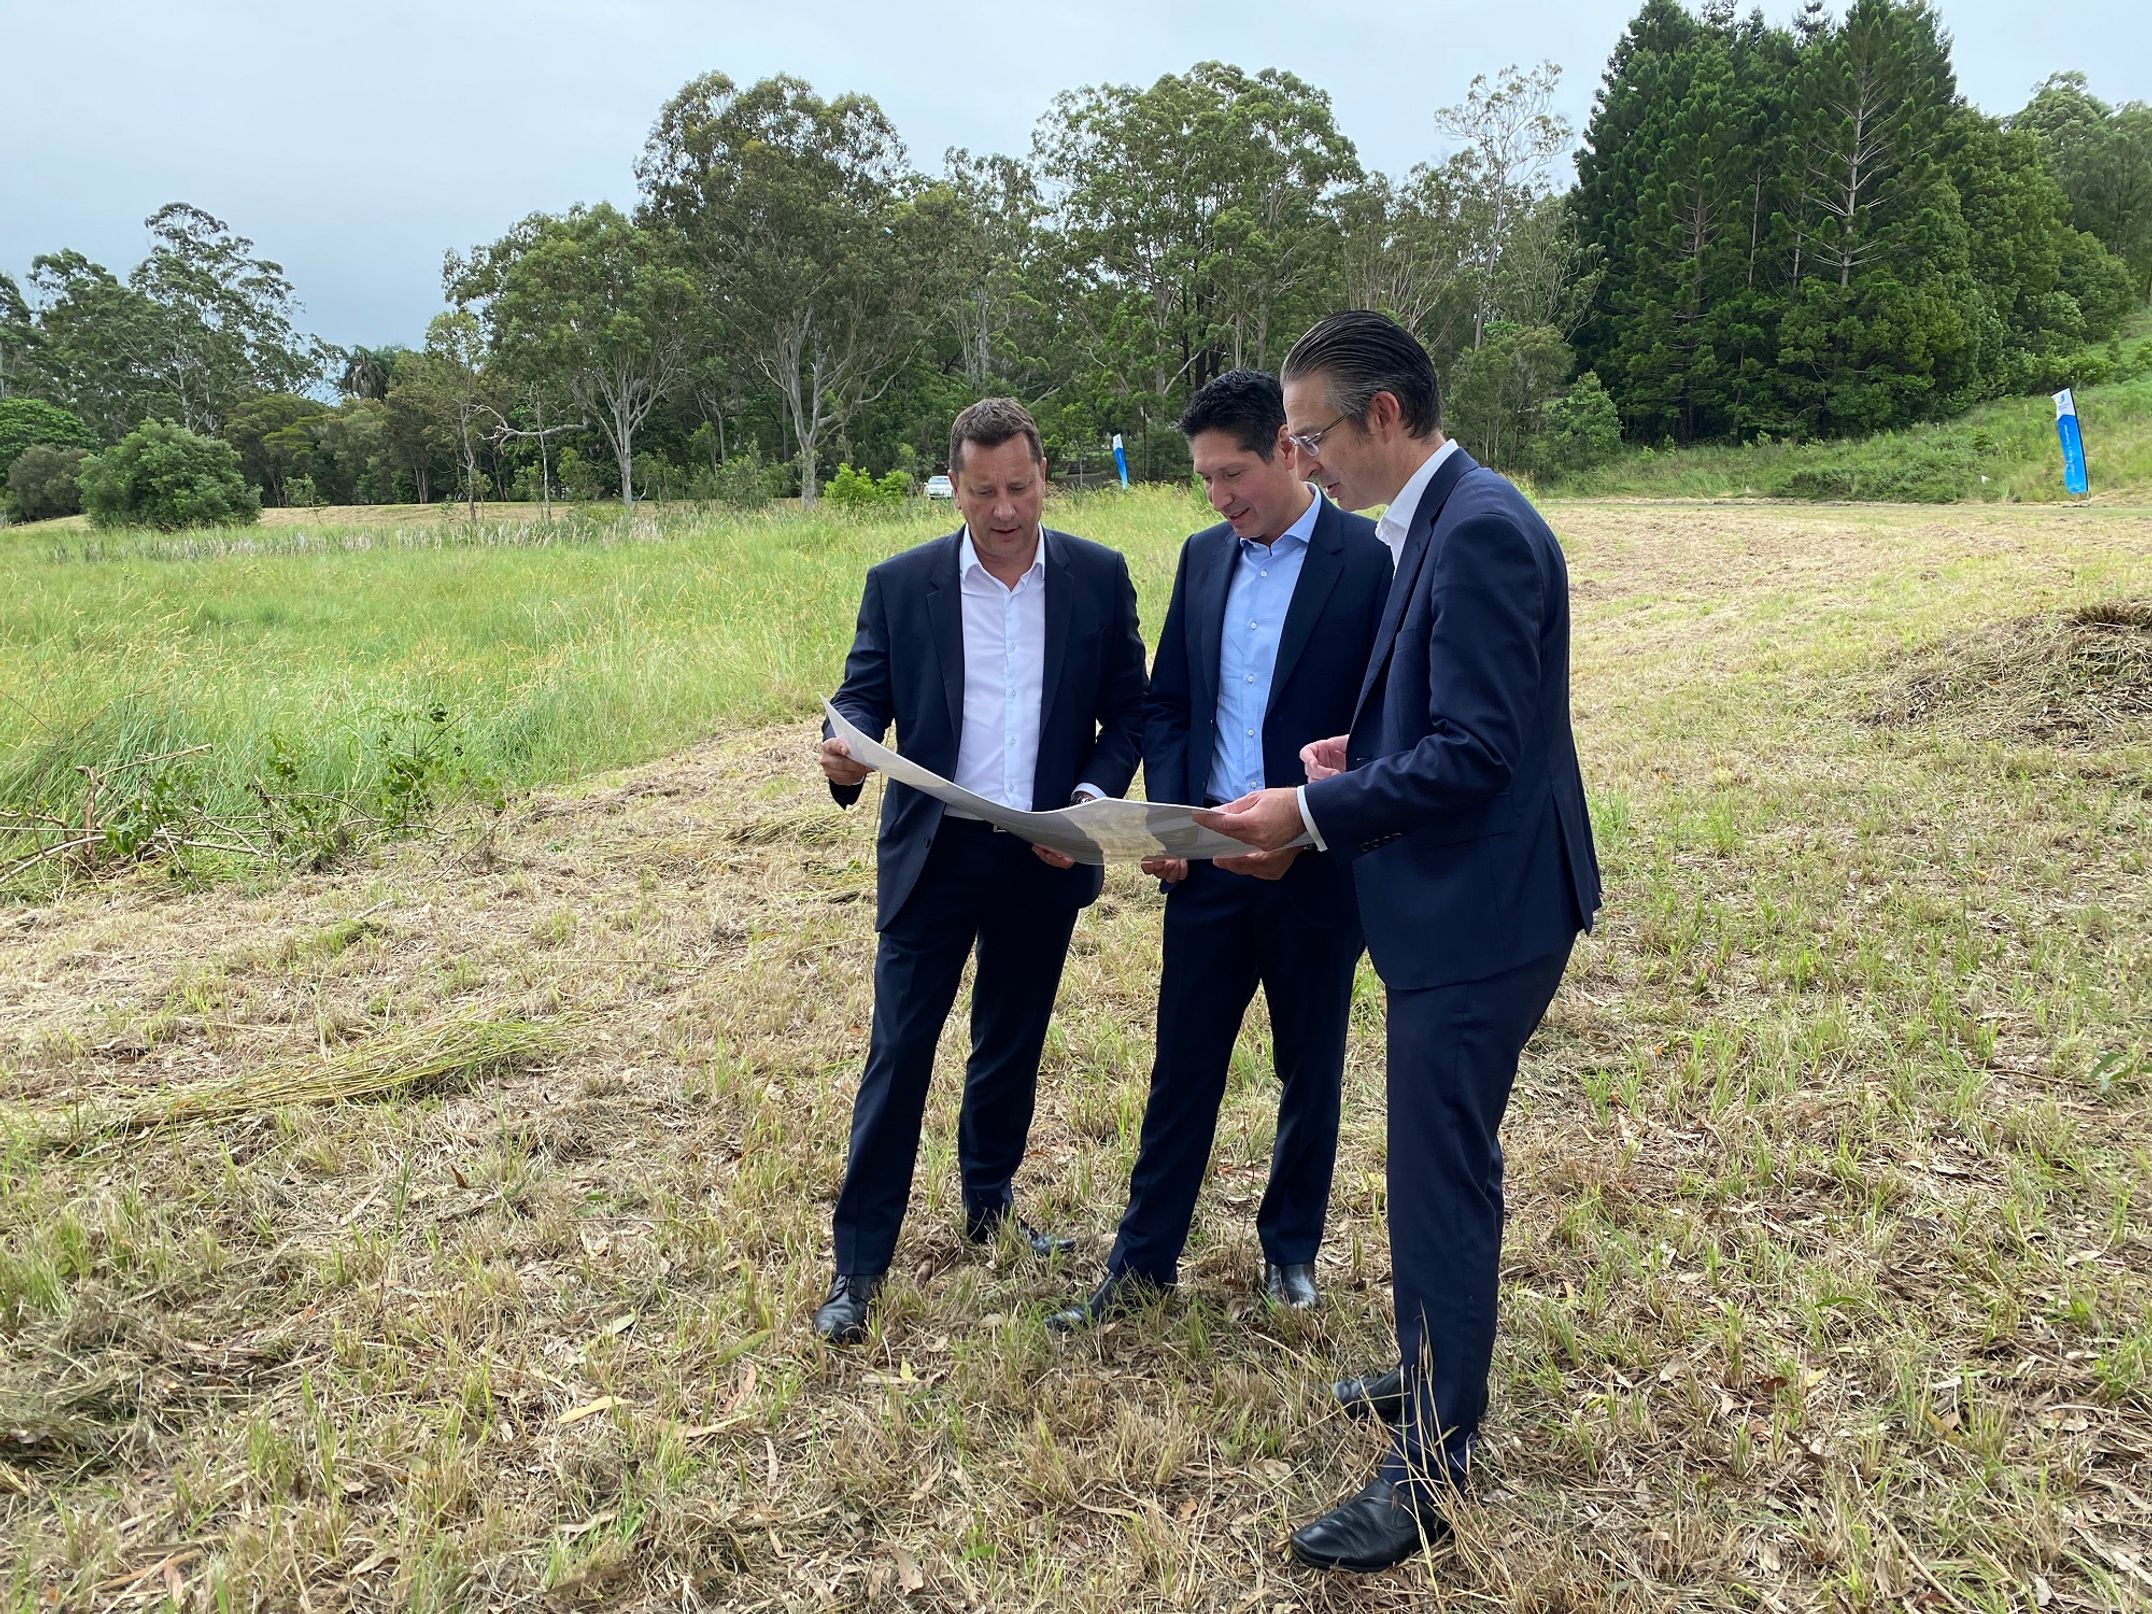 Three men examine a map in a green field